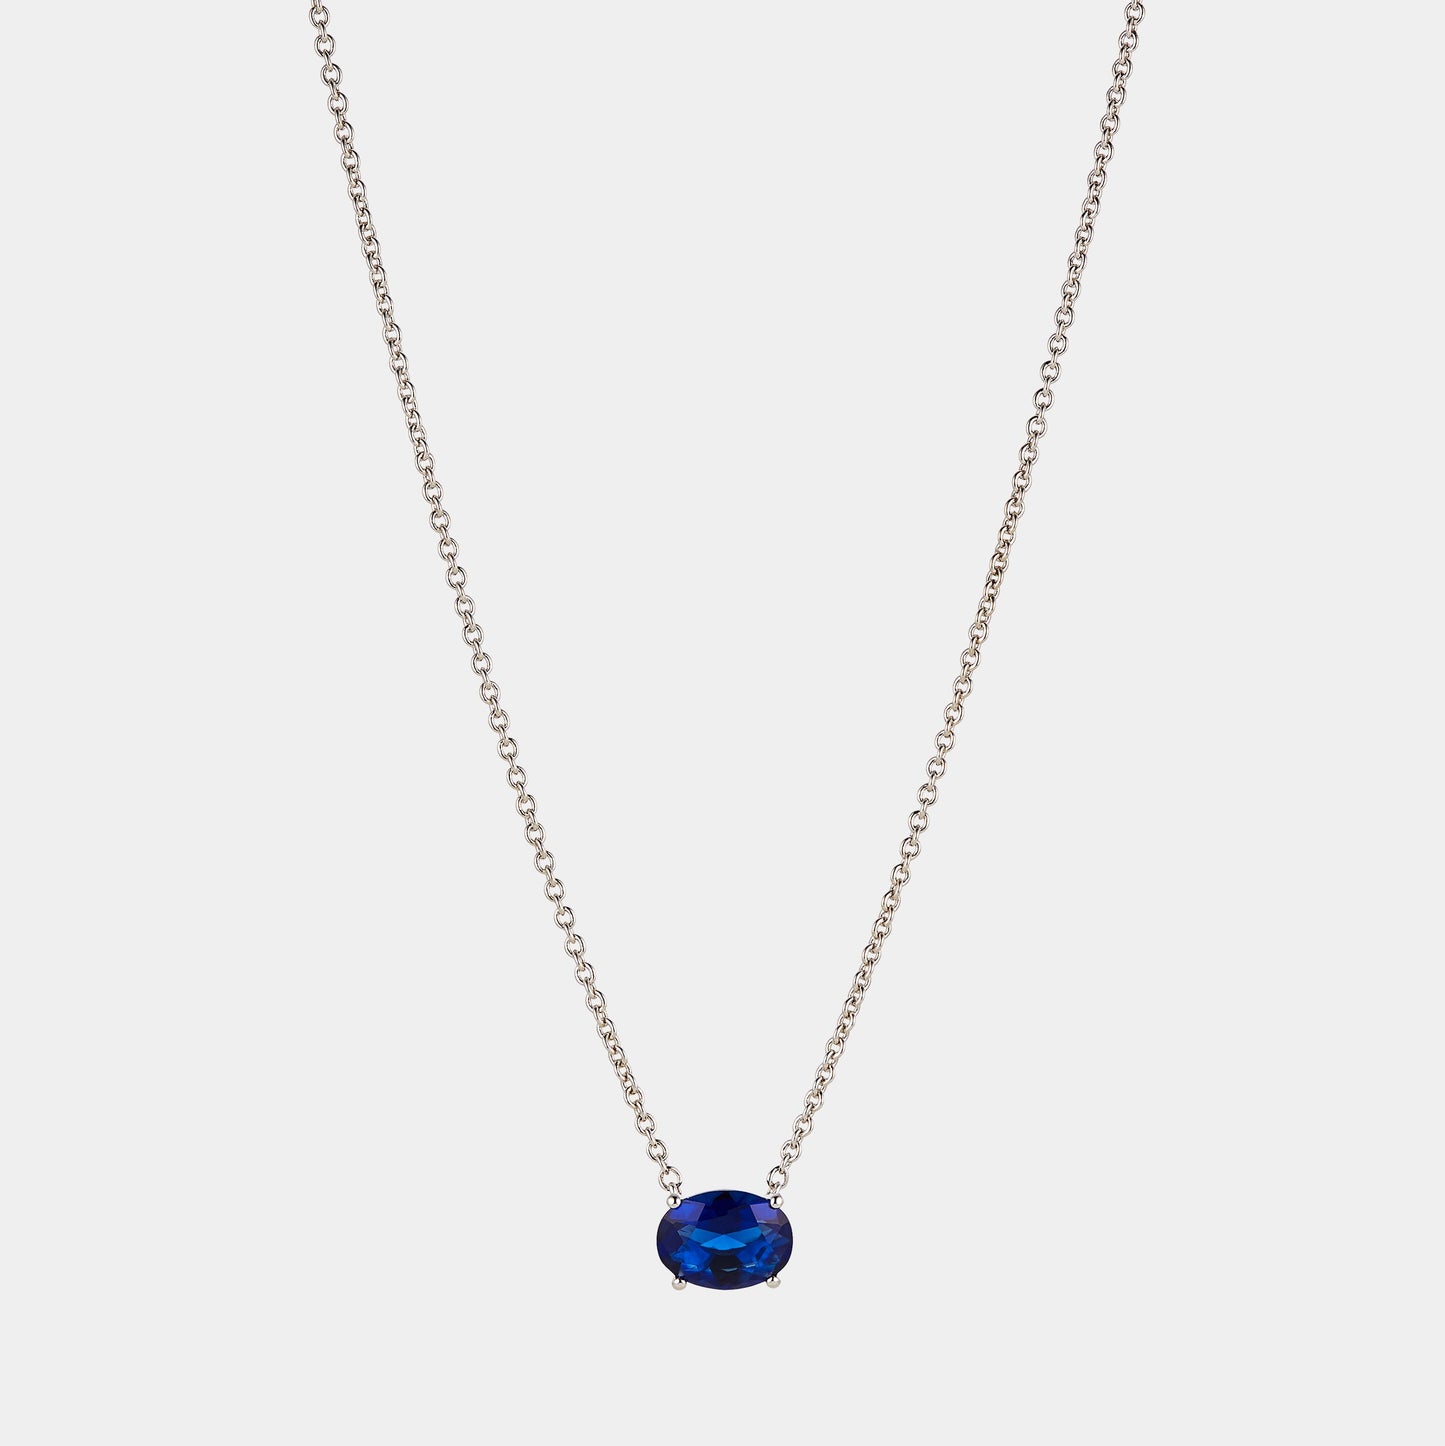 MODERN LOVE LARGE OVAL FAUX SAPPHIRE NECKLACE